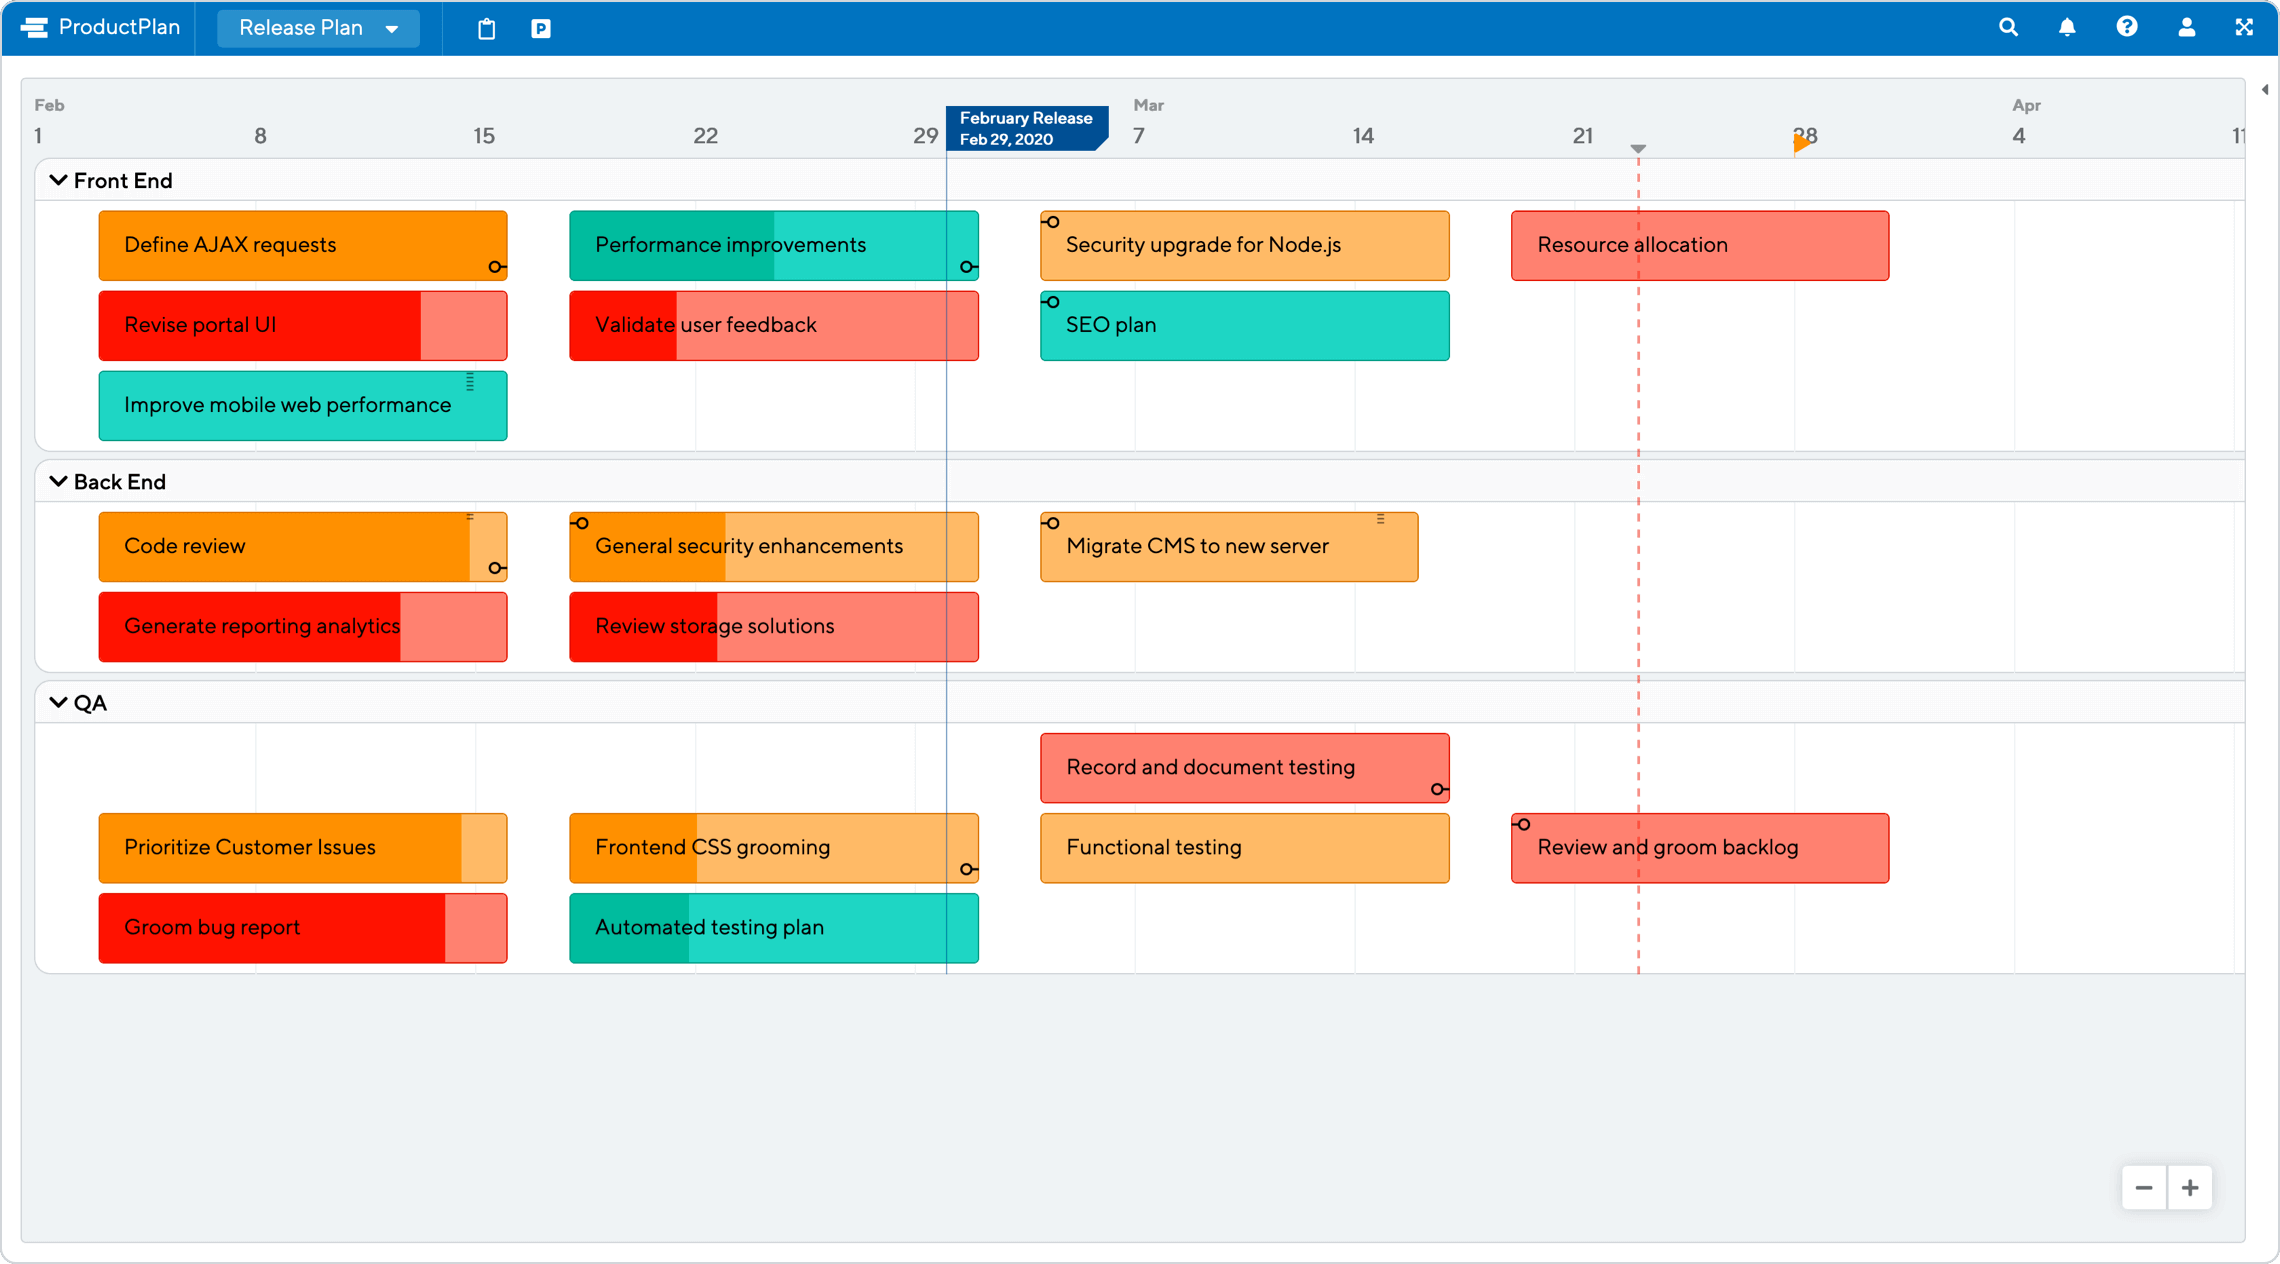 Release Plan Template | ProductPlan